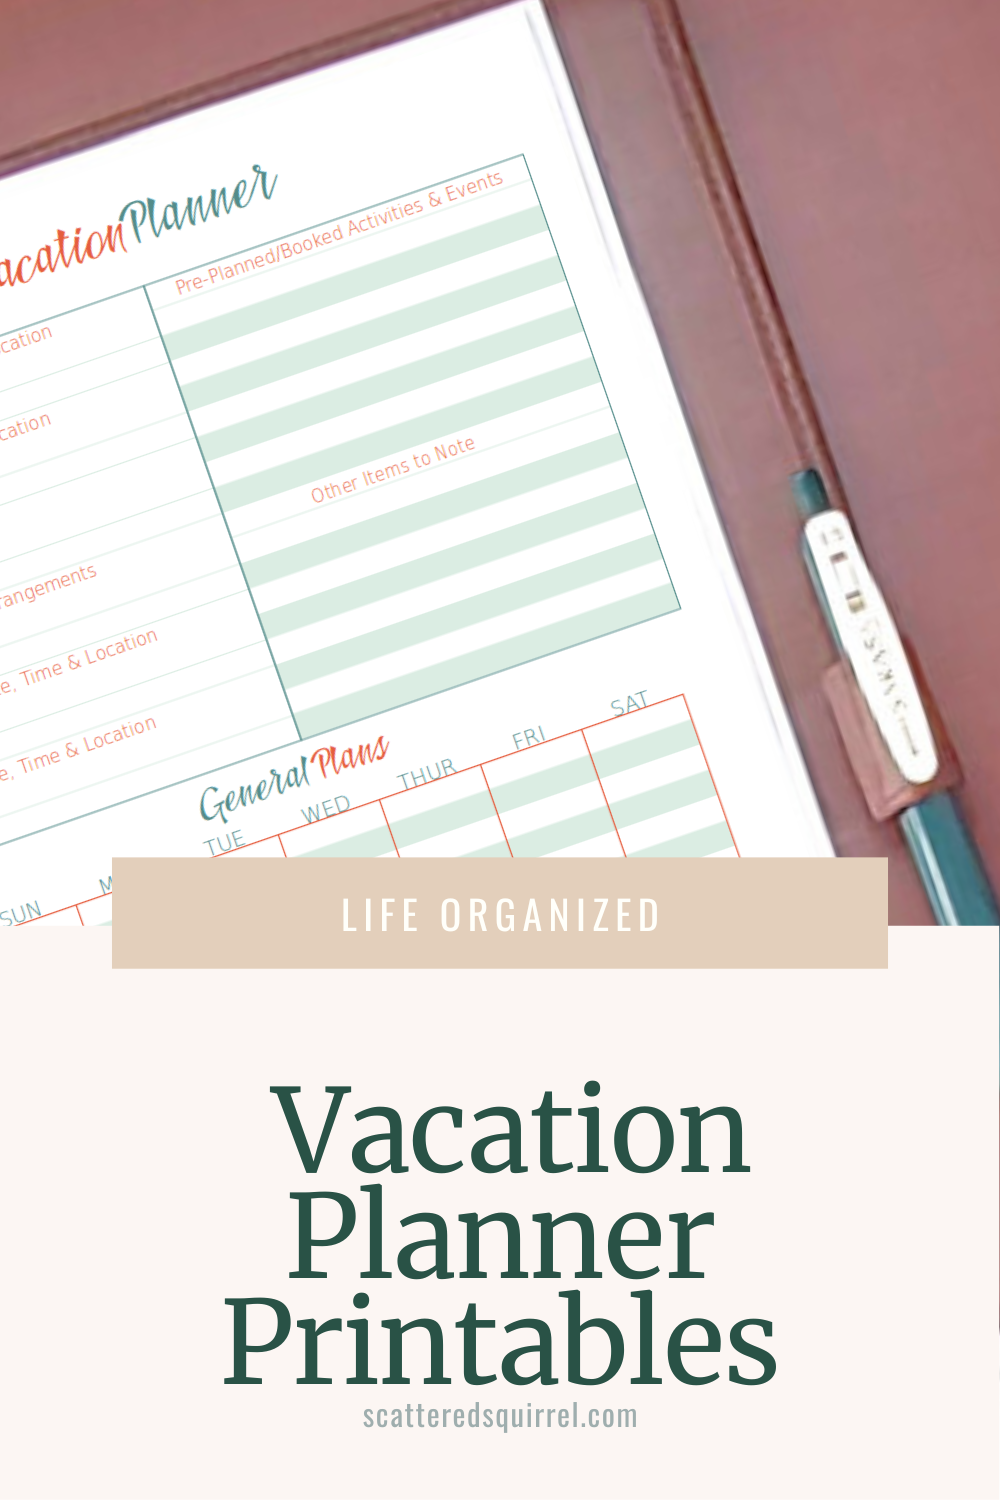 This image shows a photo of a planner lying open on a wooden desk. The top right third of the right hand page is visible and shows part of a vacation planner printable designed in shades of teal with orange accents. At the bottom of the photo is a tan box that says Life Organized in white text. Under that, in dark green text is the title, "Vacation Planner Printables" on a light sand background.